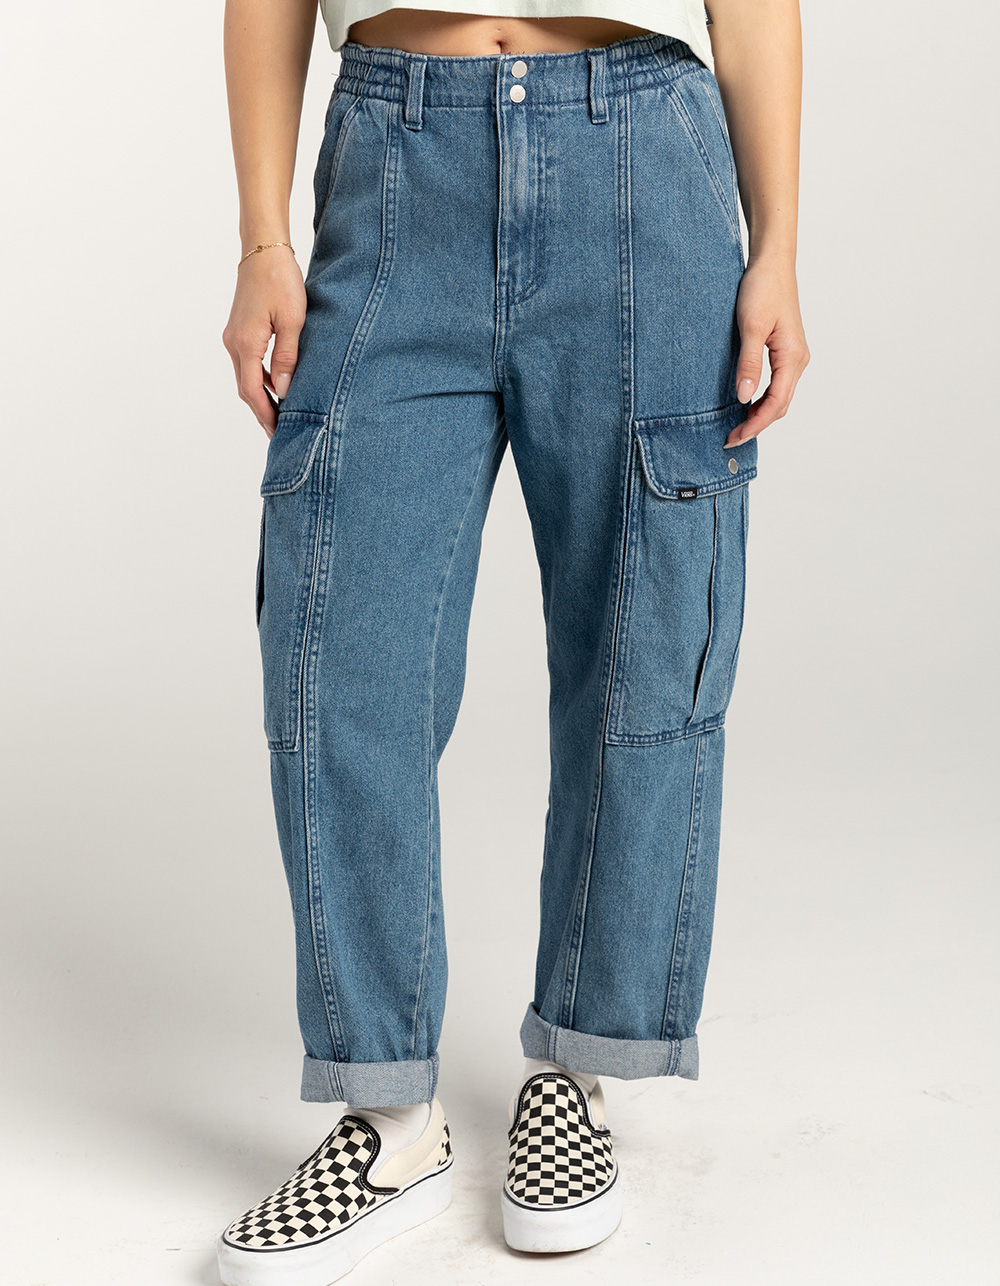 Denim Cargo Pants? Yes! 4 Ways You Can Kill The Trend.